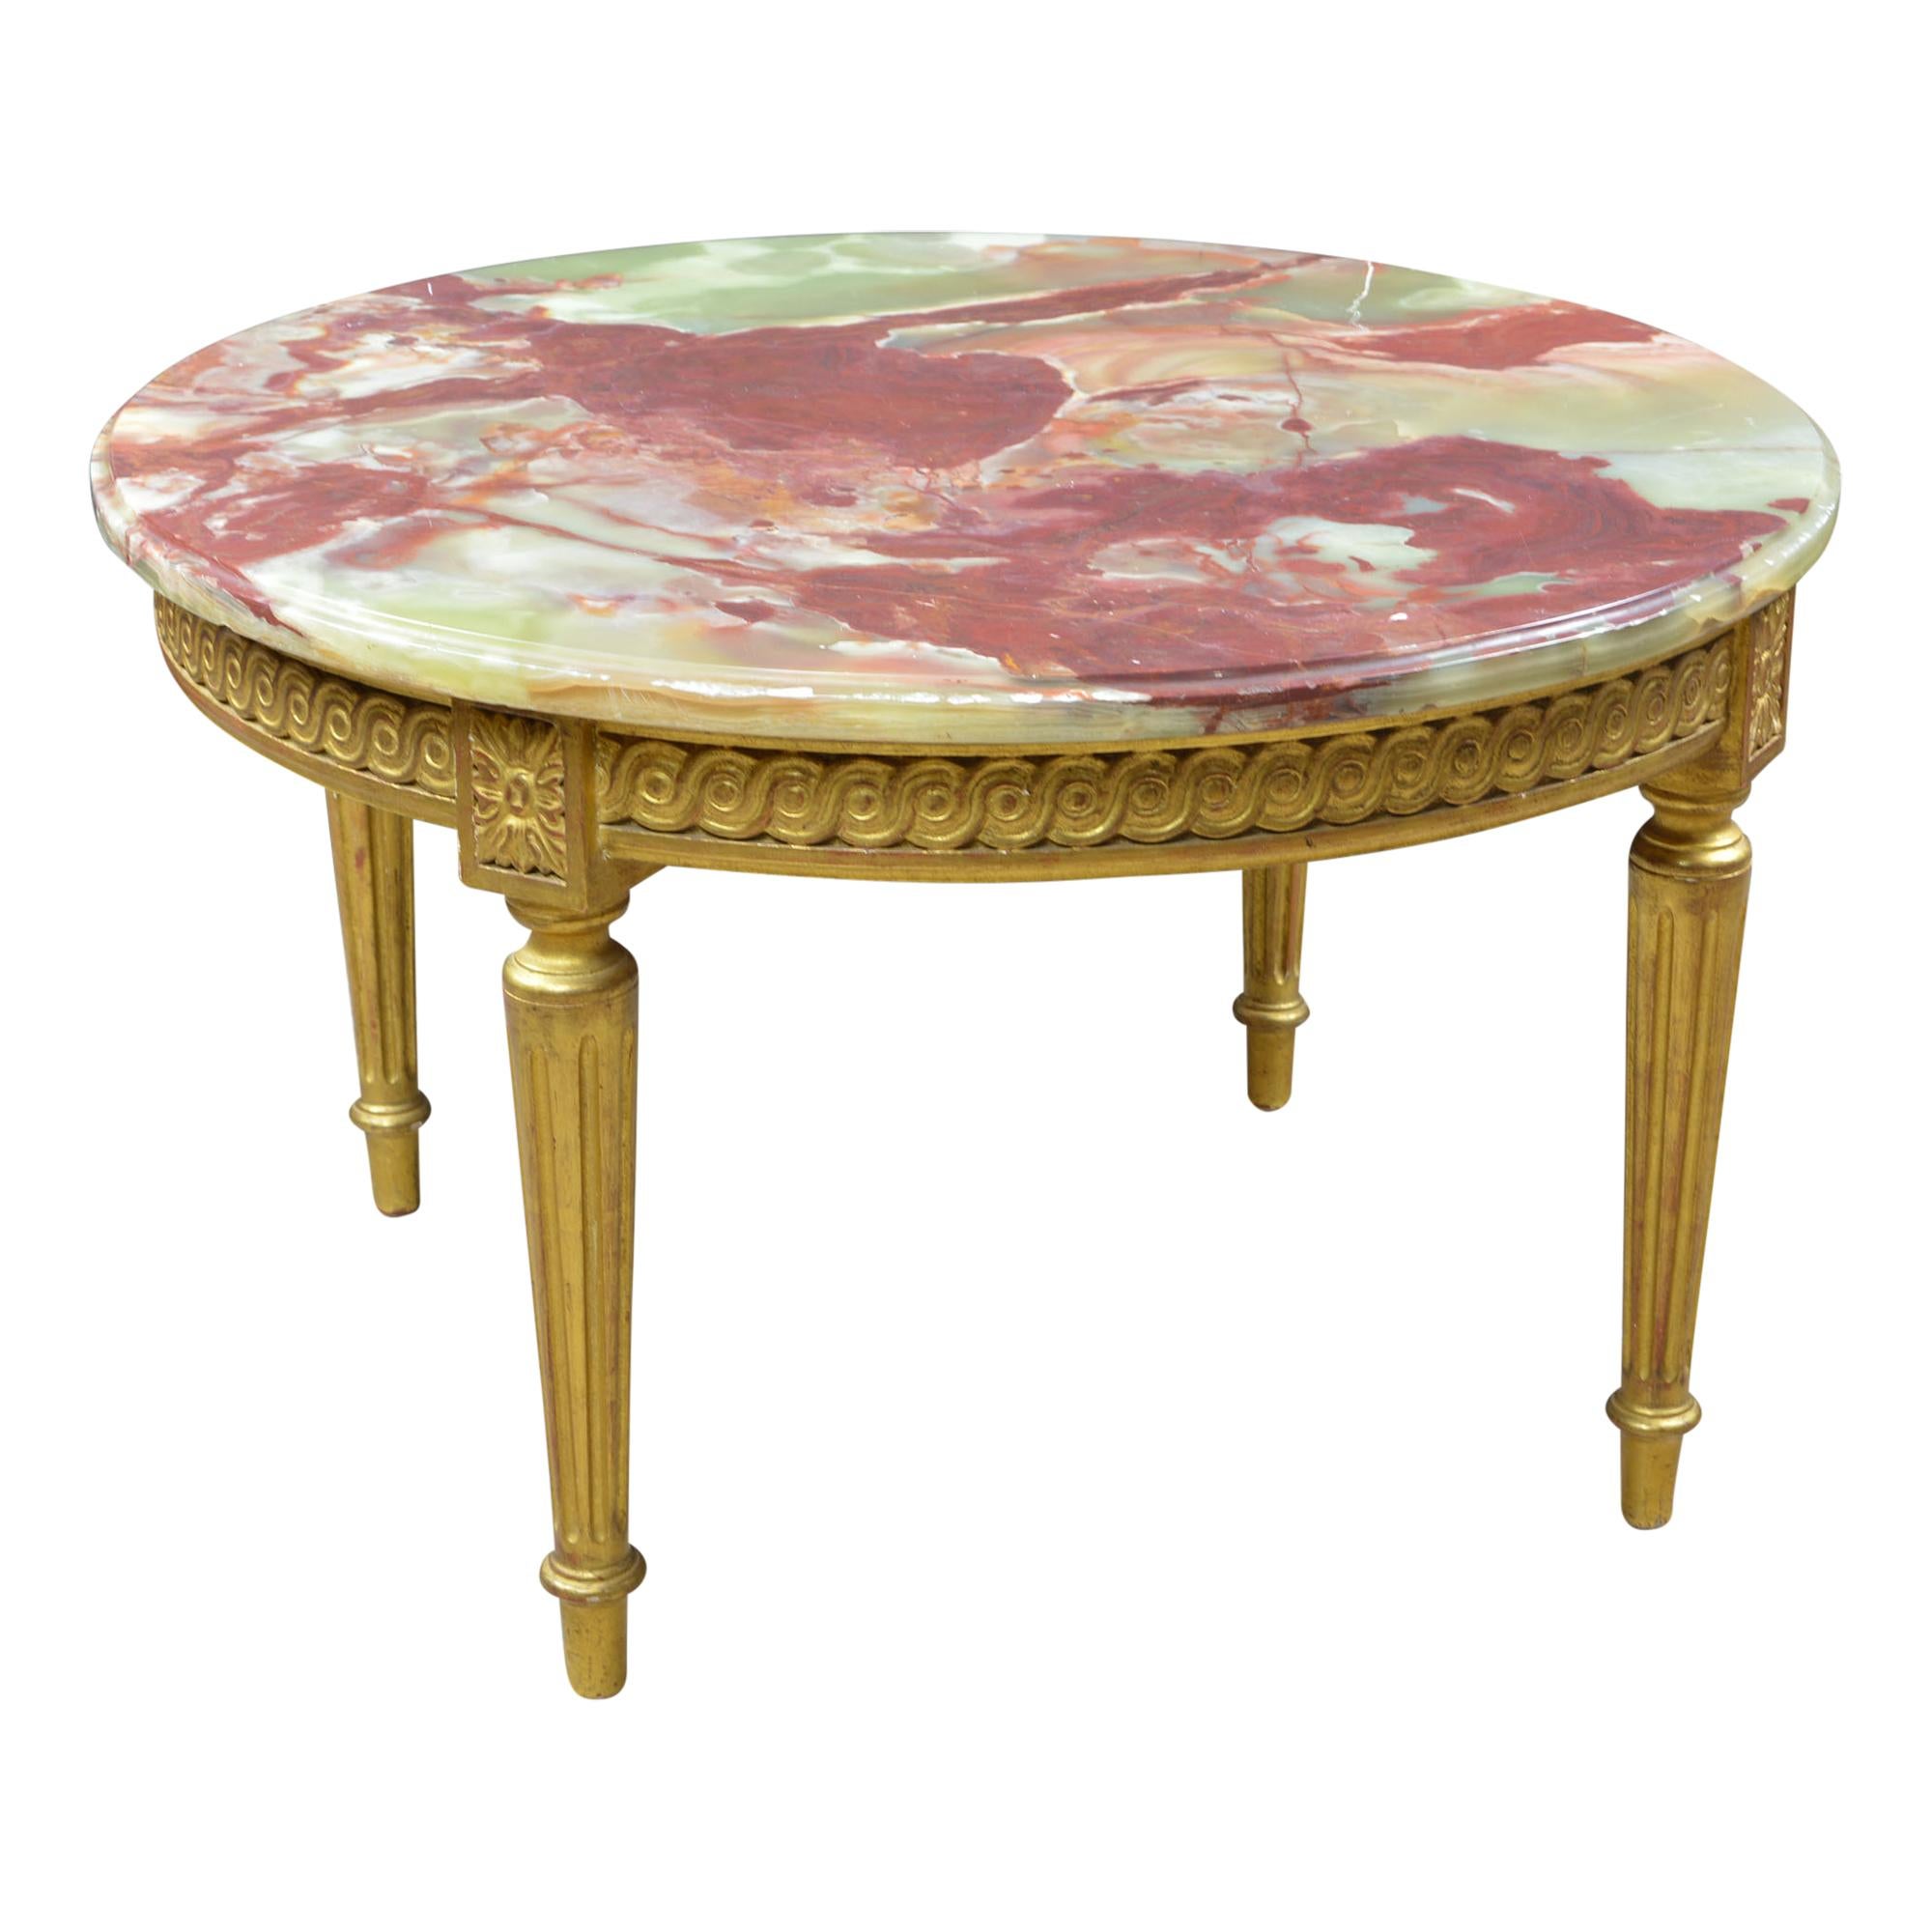 Louis XV Gilded Round Coffee Table with Agata Onyx Stone Top For Sale